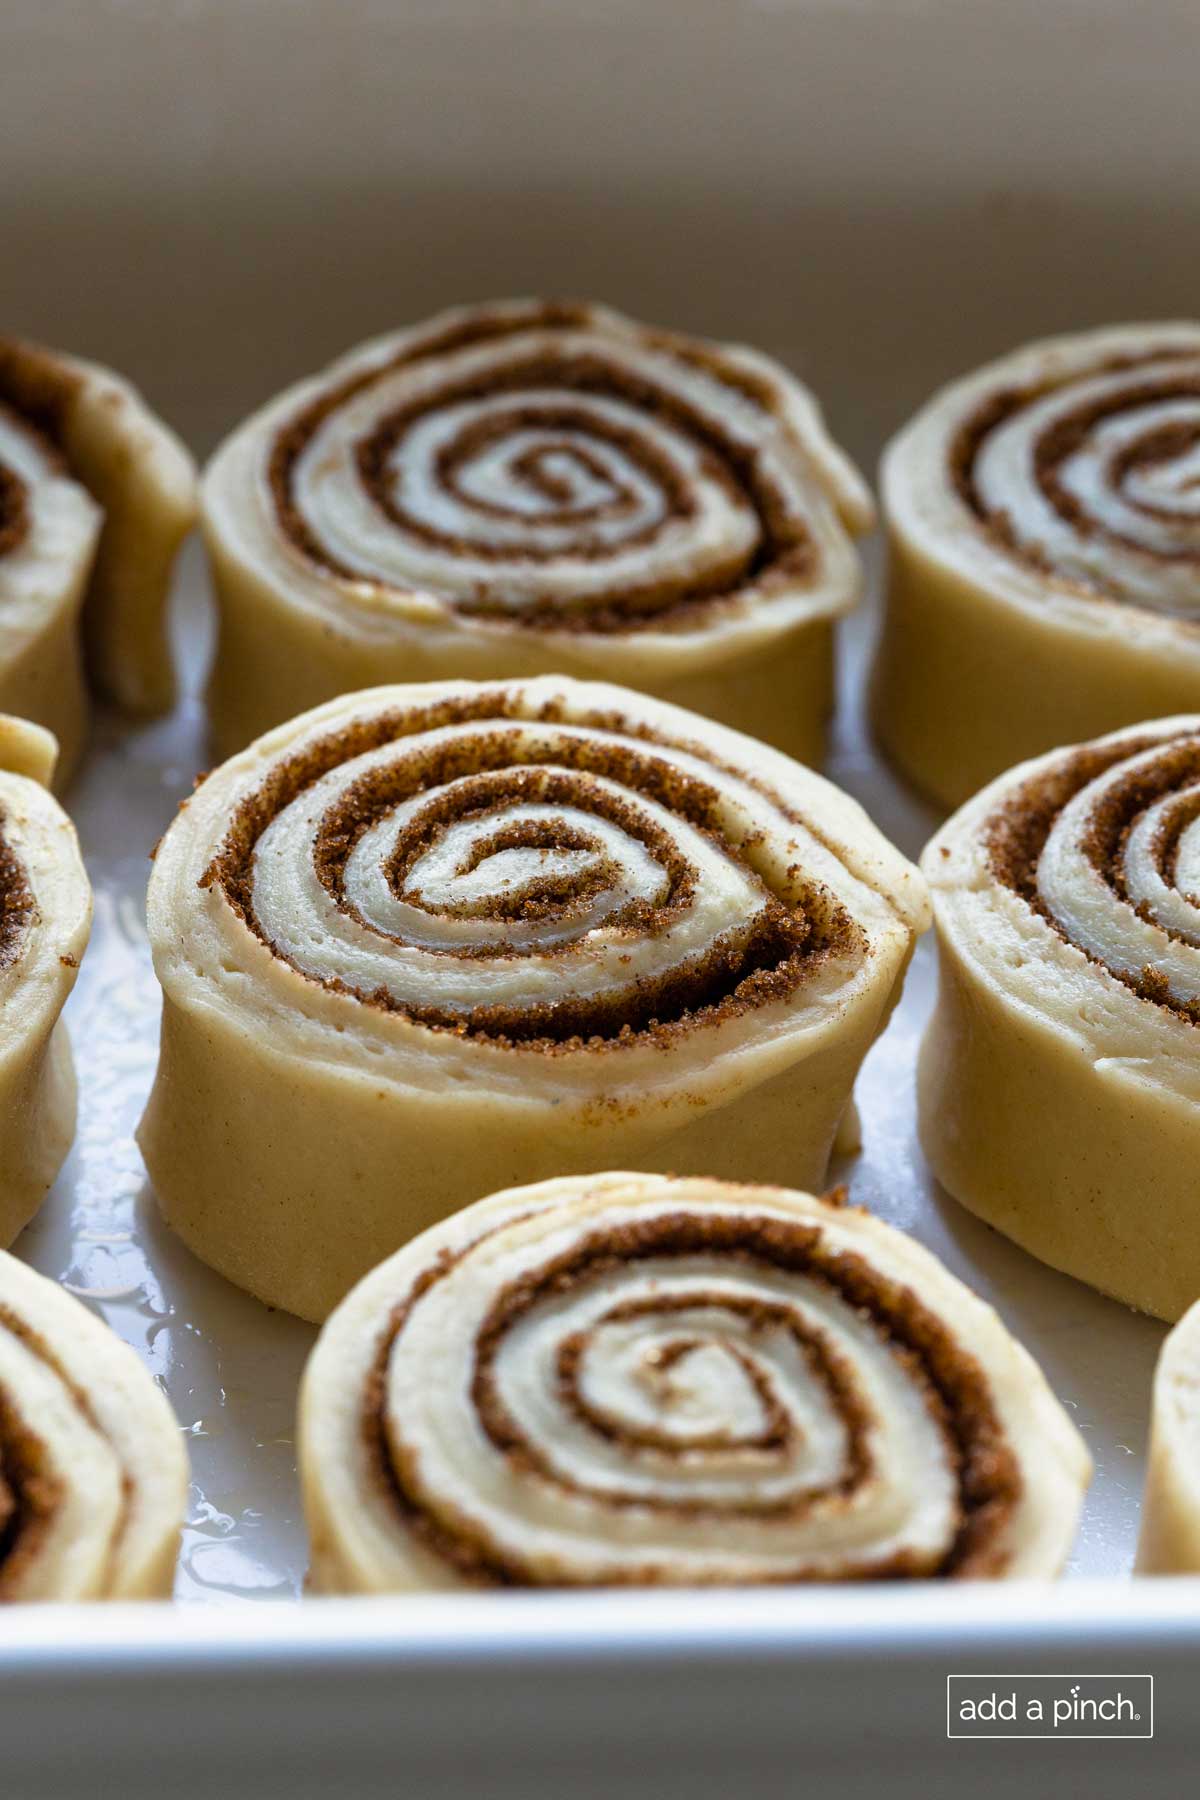 Baking pan is buttered and holds rows of unbaked cinnamon rolls that show swirls of cinnamon filling inside. 